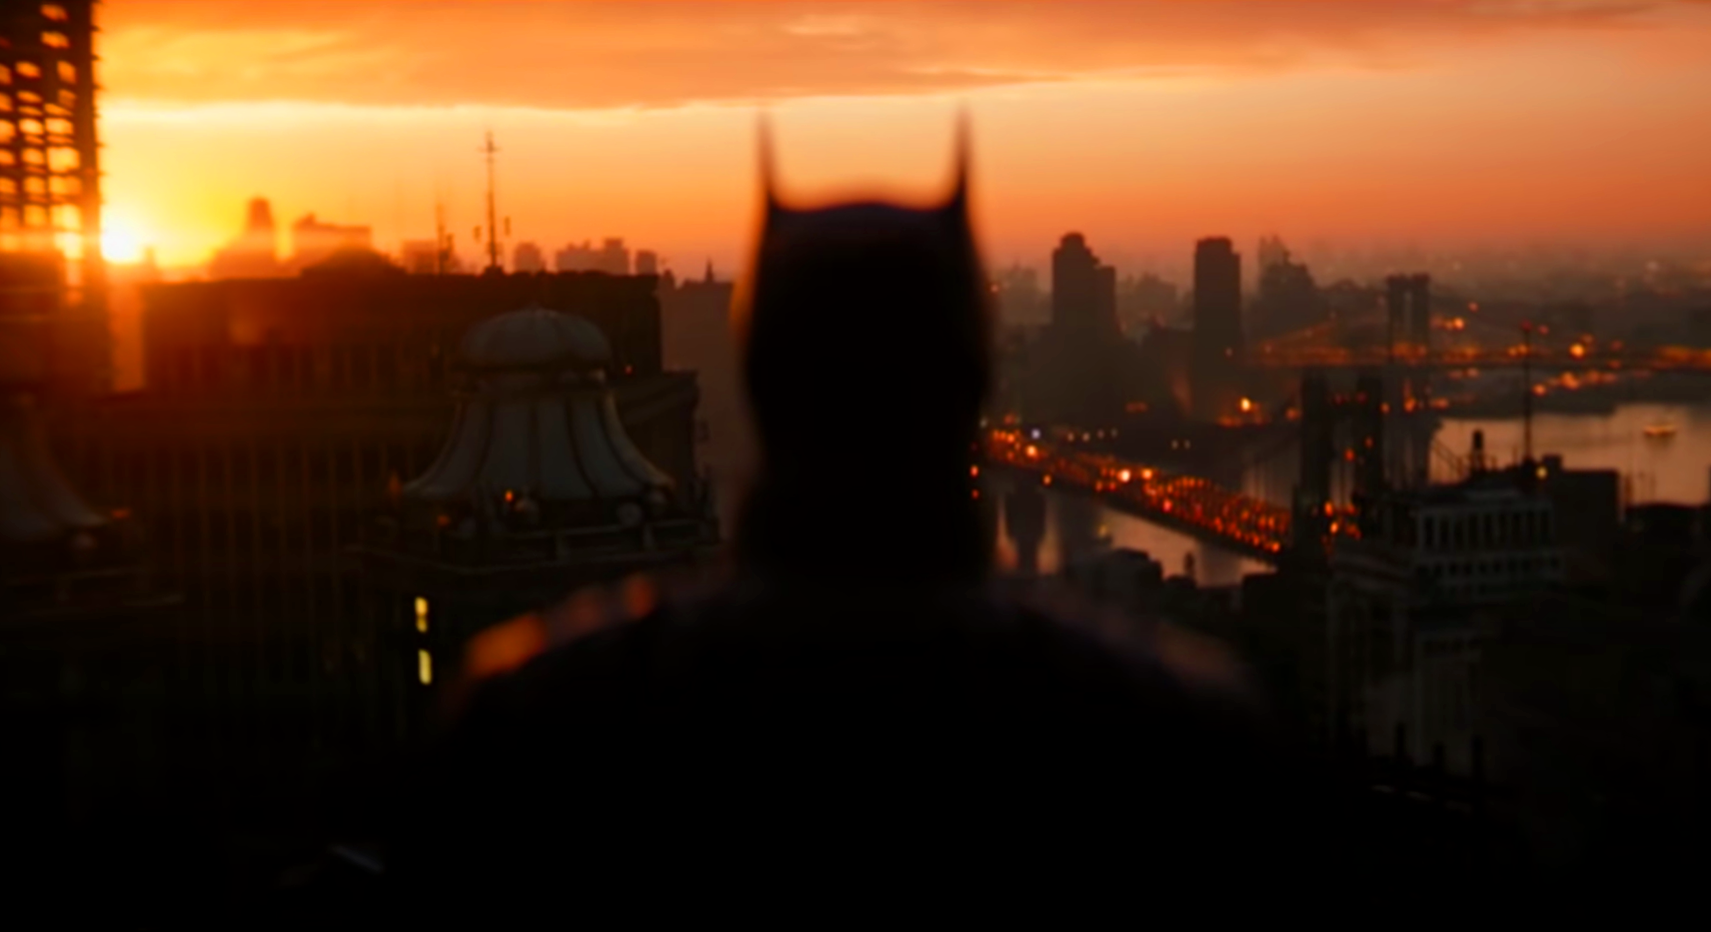 Review: 'The Batman' debuts an imperfect hero in a fresh adaptation